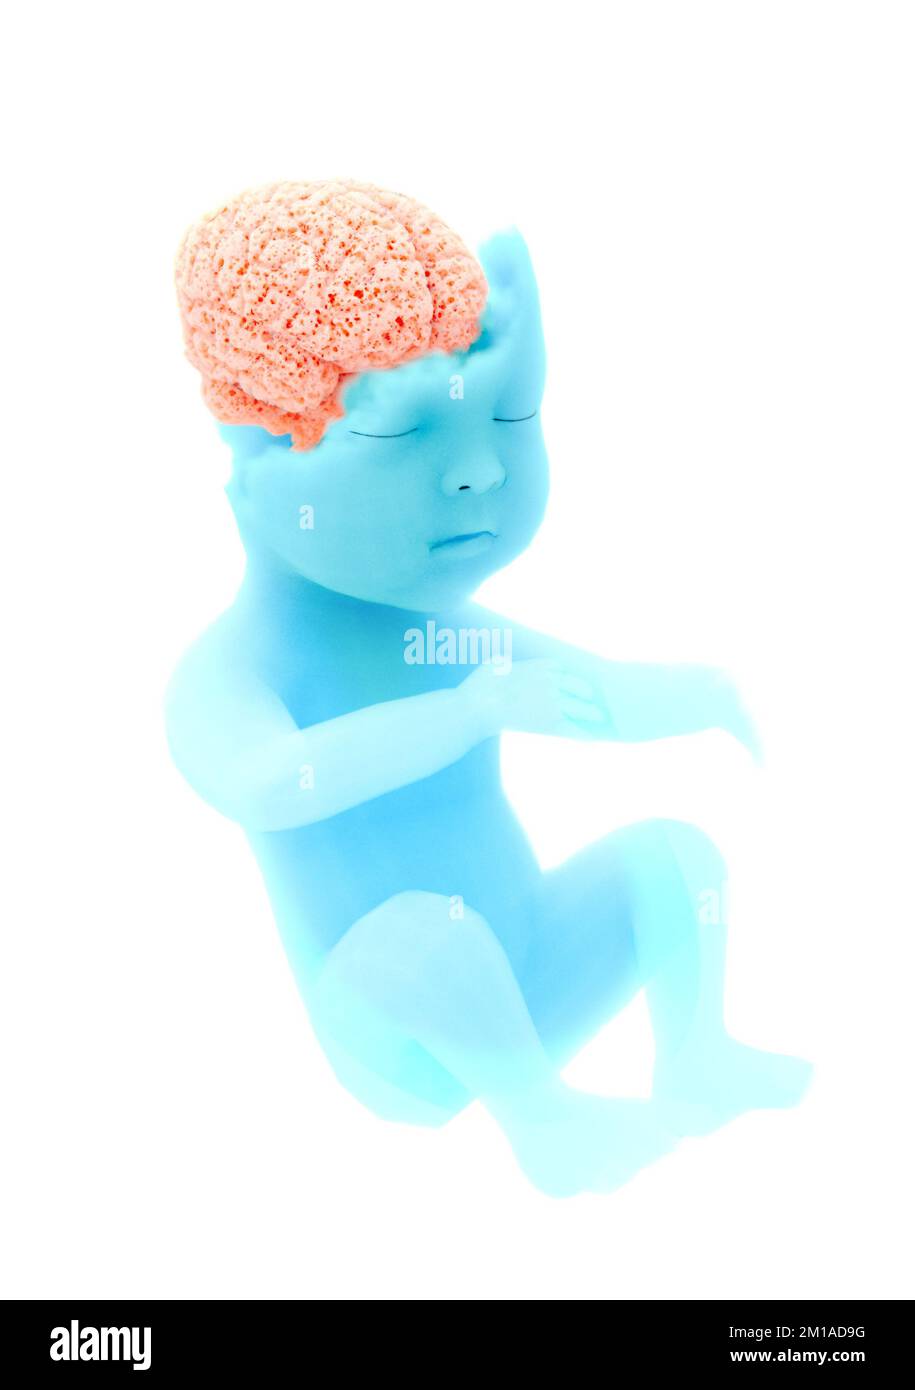 Child, fetus, organ formation. Sponge effect brain. Sensory expansion learning. Mother's womb, birth. 3d rendering Stock Photo